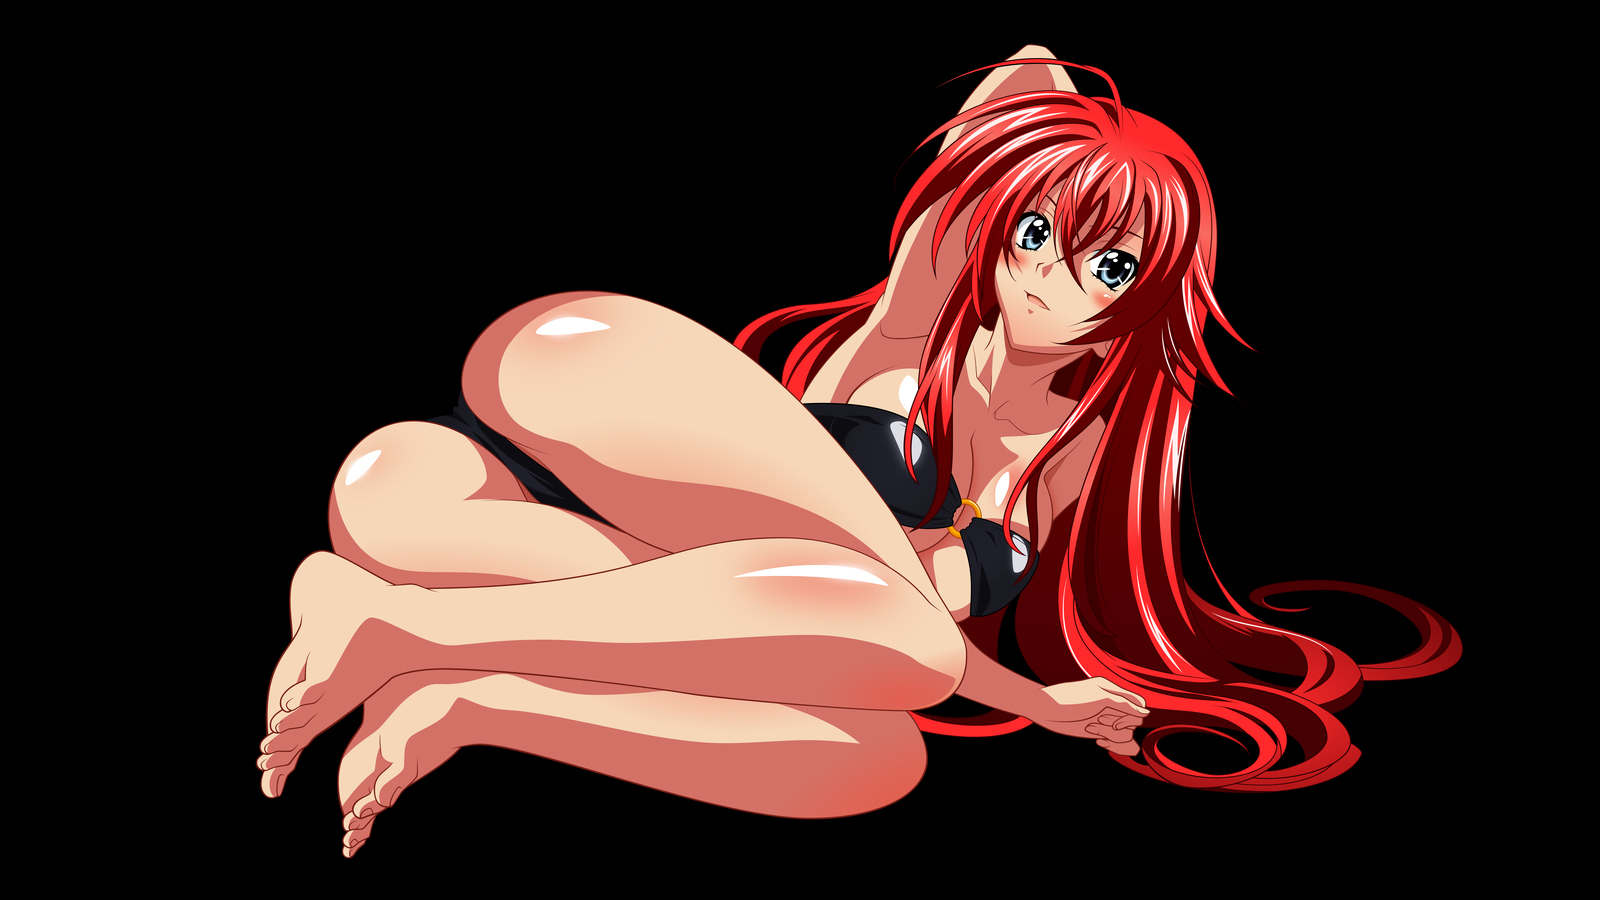 49 hot DxD high school Rias Gremory photos that will make you fall in love ...